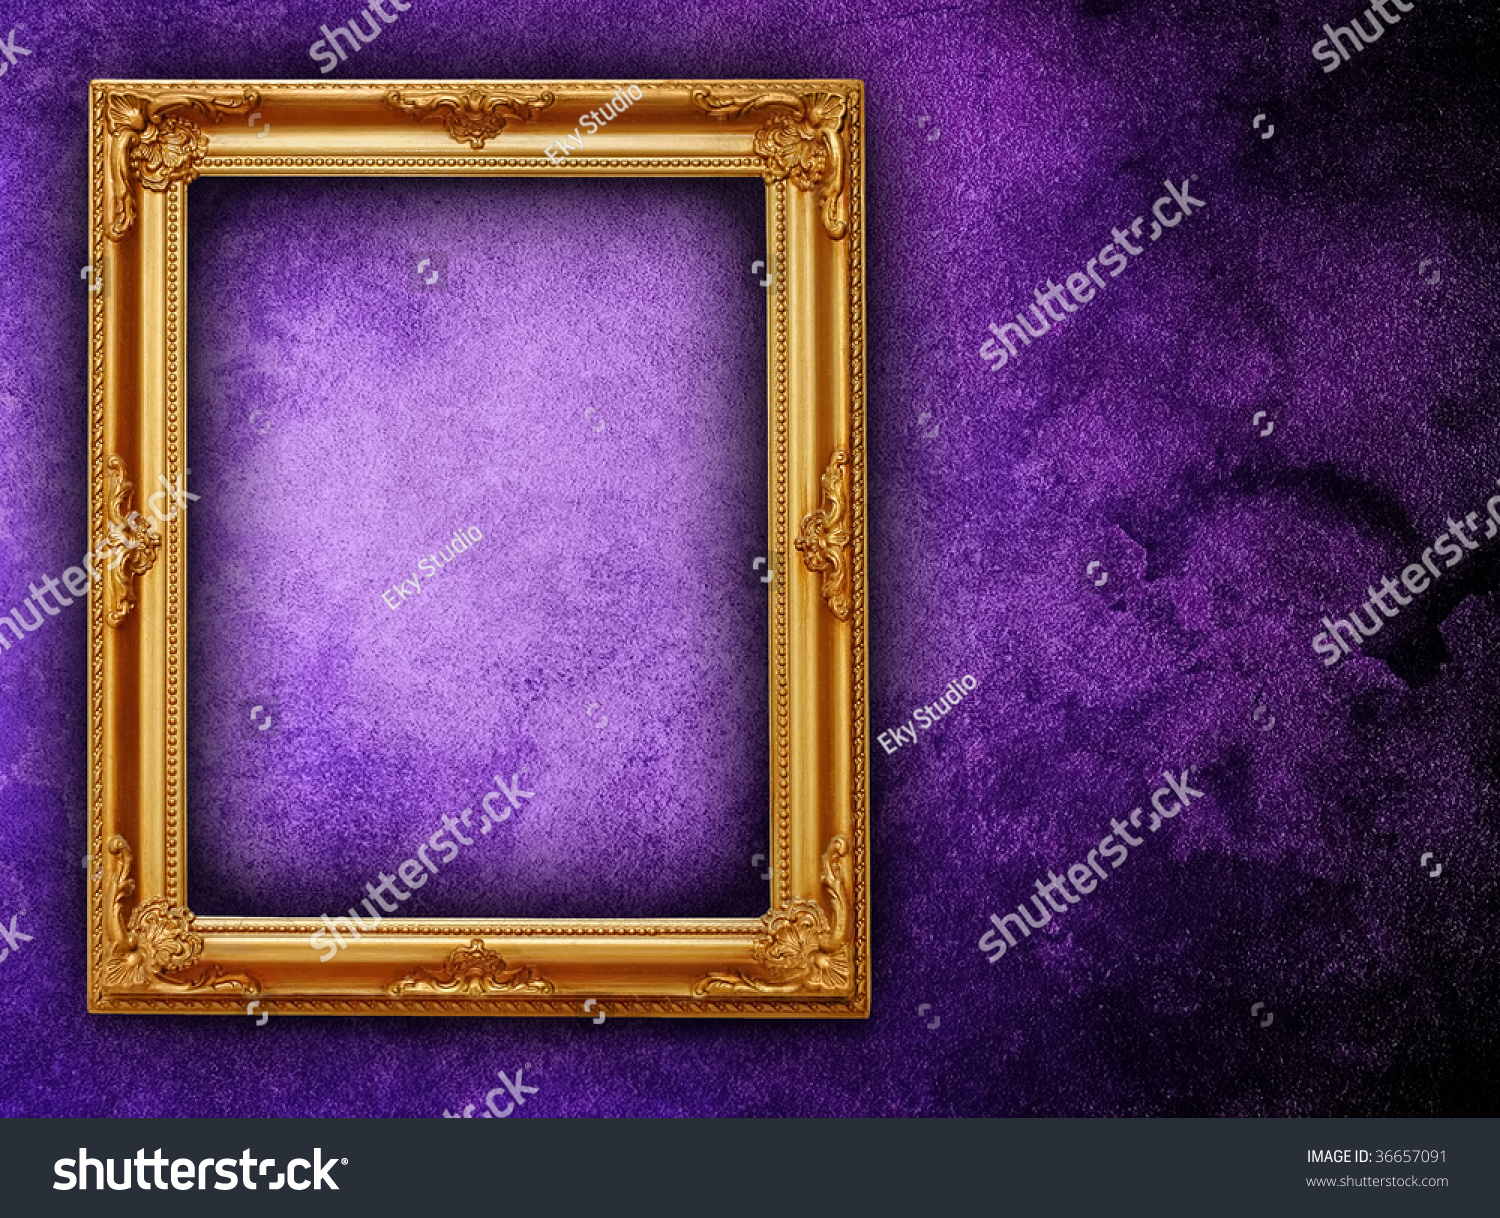 gold-and-purple-border-images-stock-photos-vectors-shutterstock